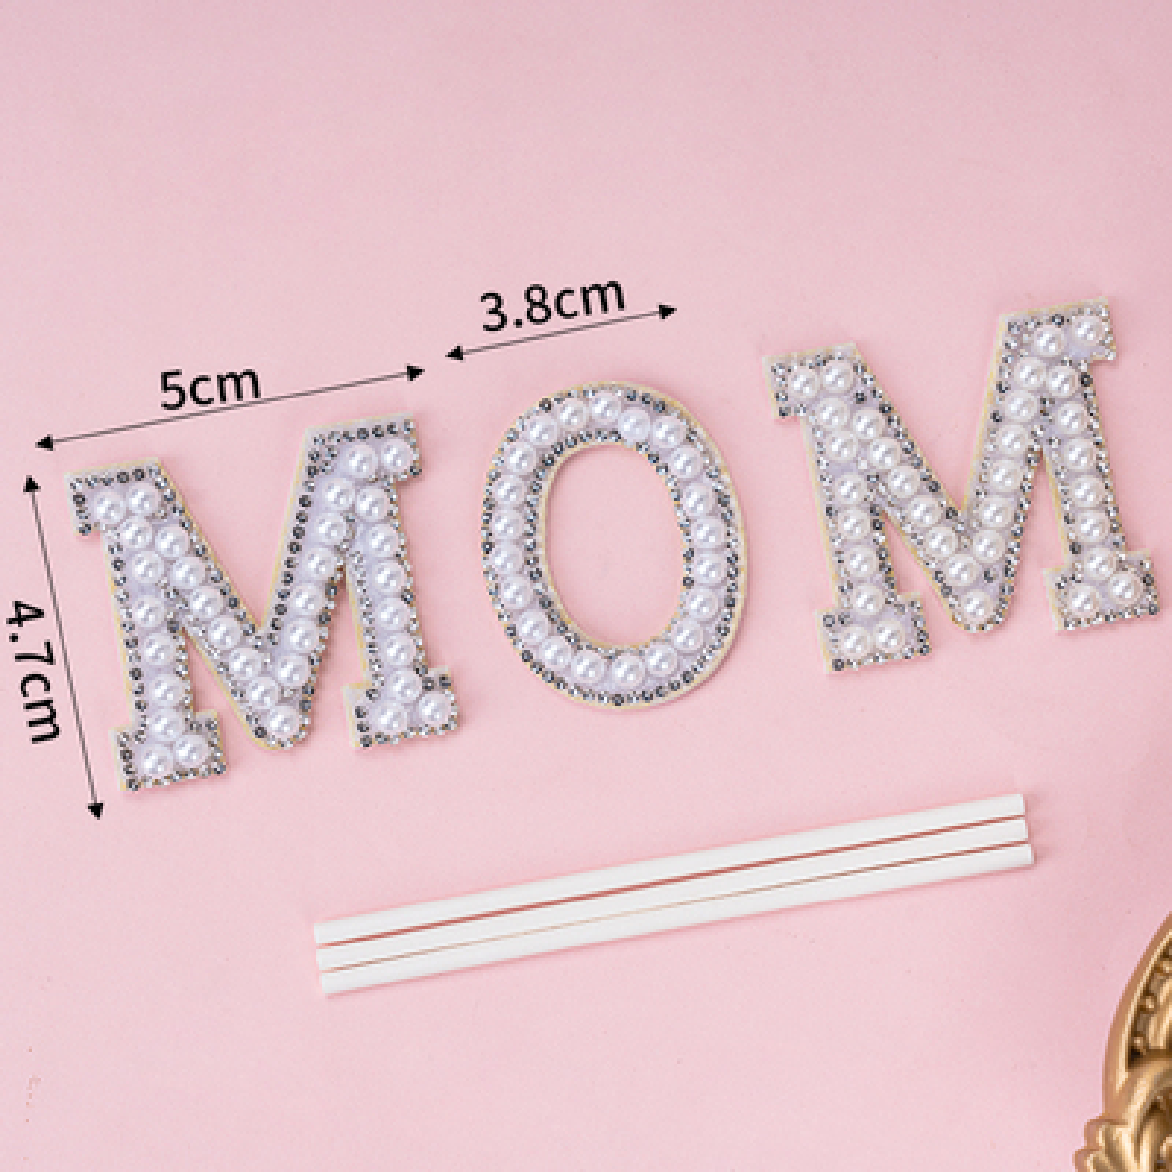 Cake Topper, Cake Decoration - MOM Mother's Day Sparkly Pearl - White